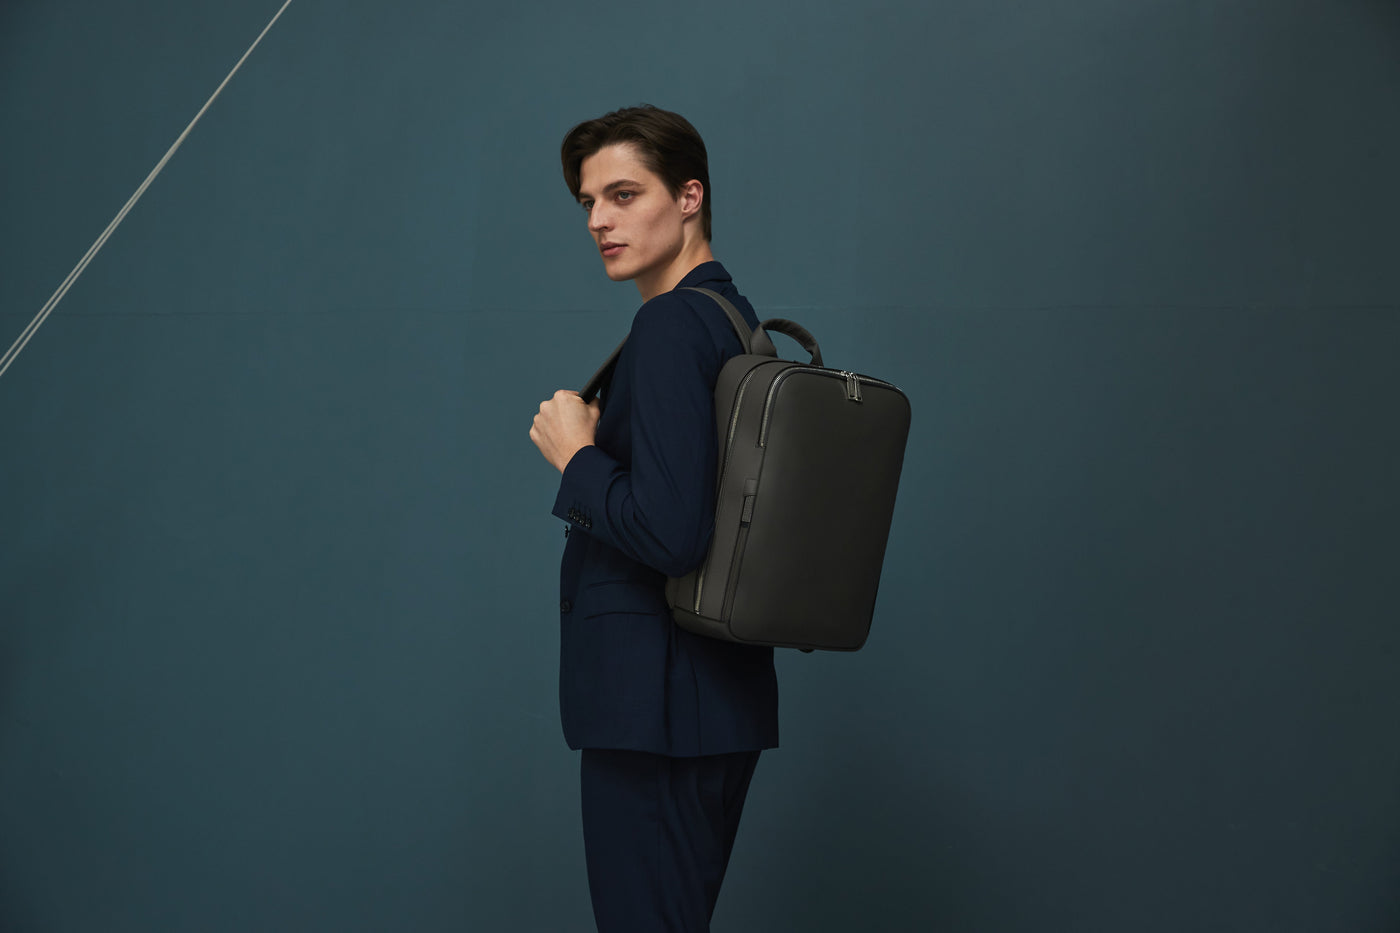 Modern businessman with a stylish David backpack from BONAVENTURA for everyday office life